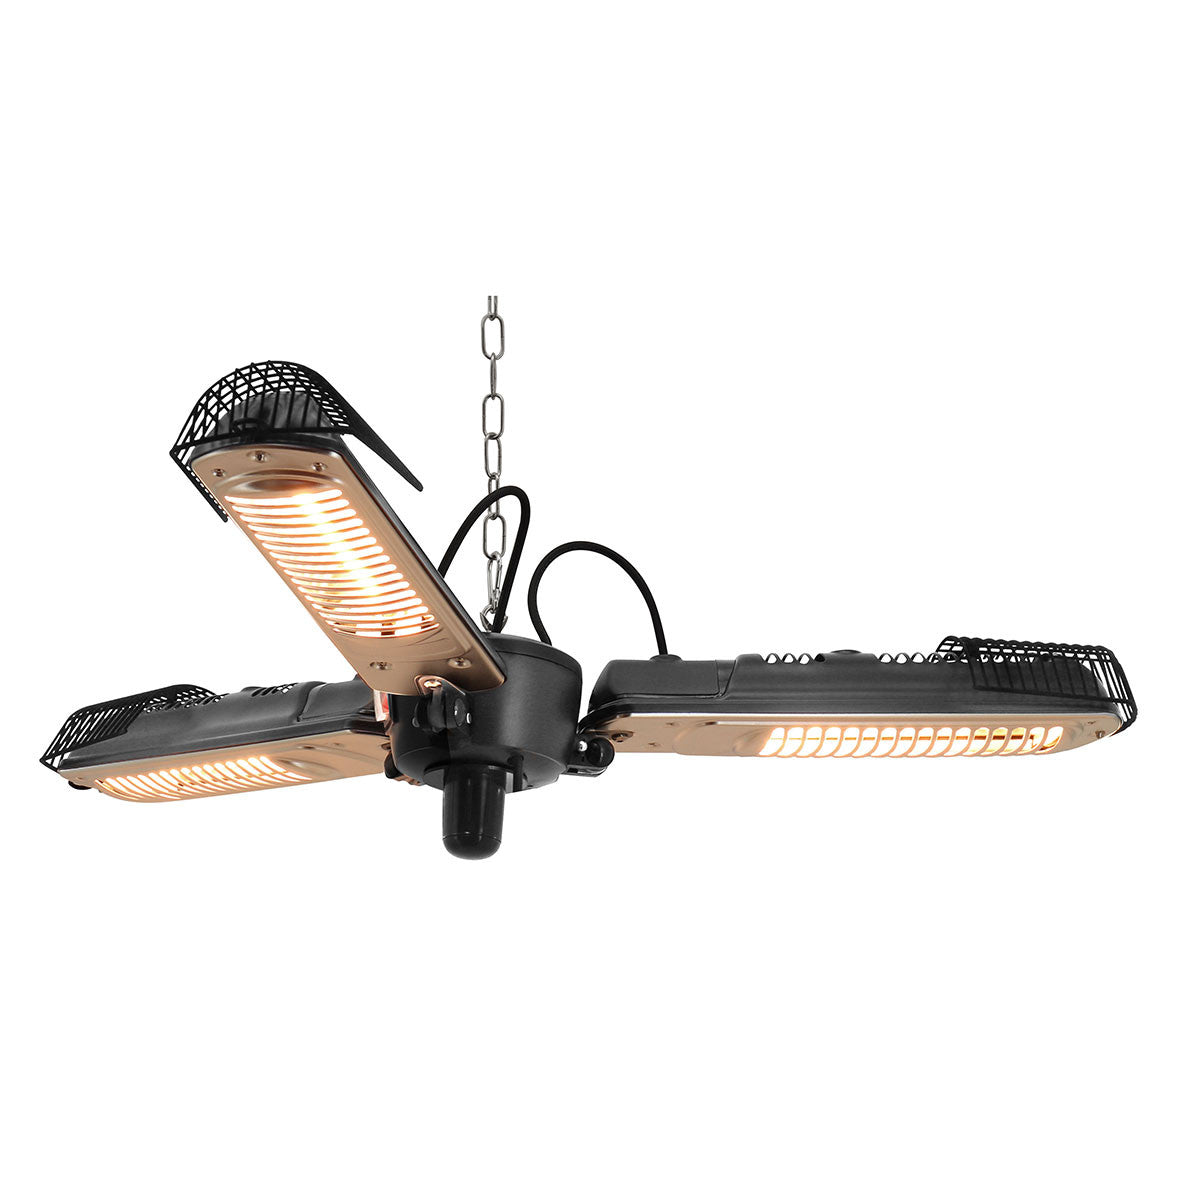 2000W Vulcan Parasol Tri Electric Patio Heater - Vookoo Lifestyle